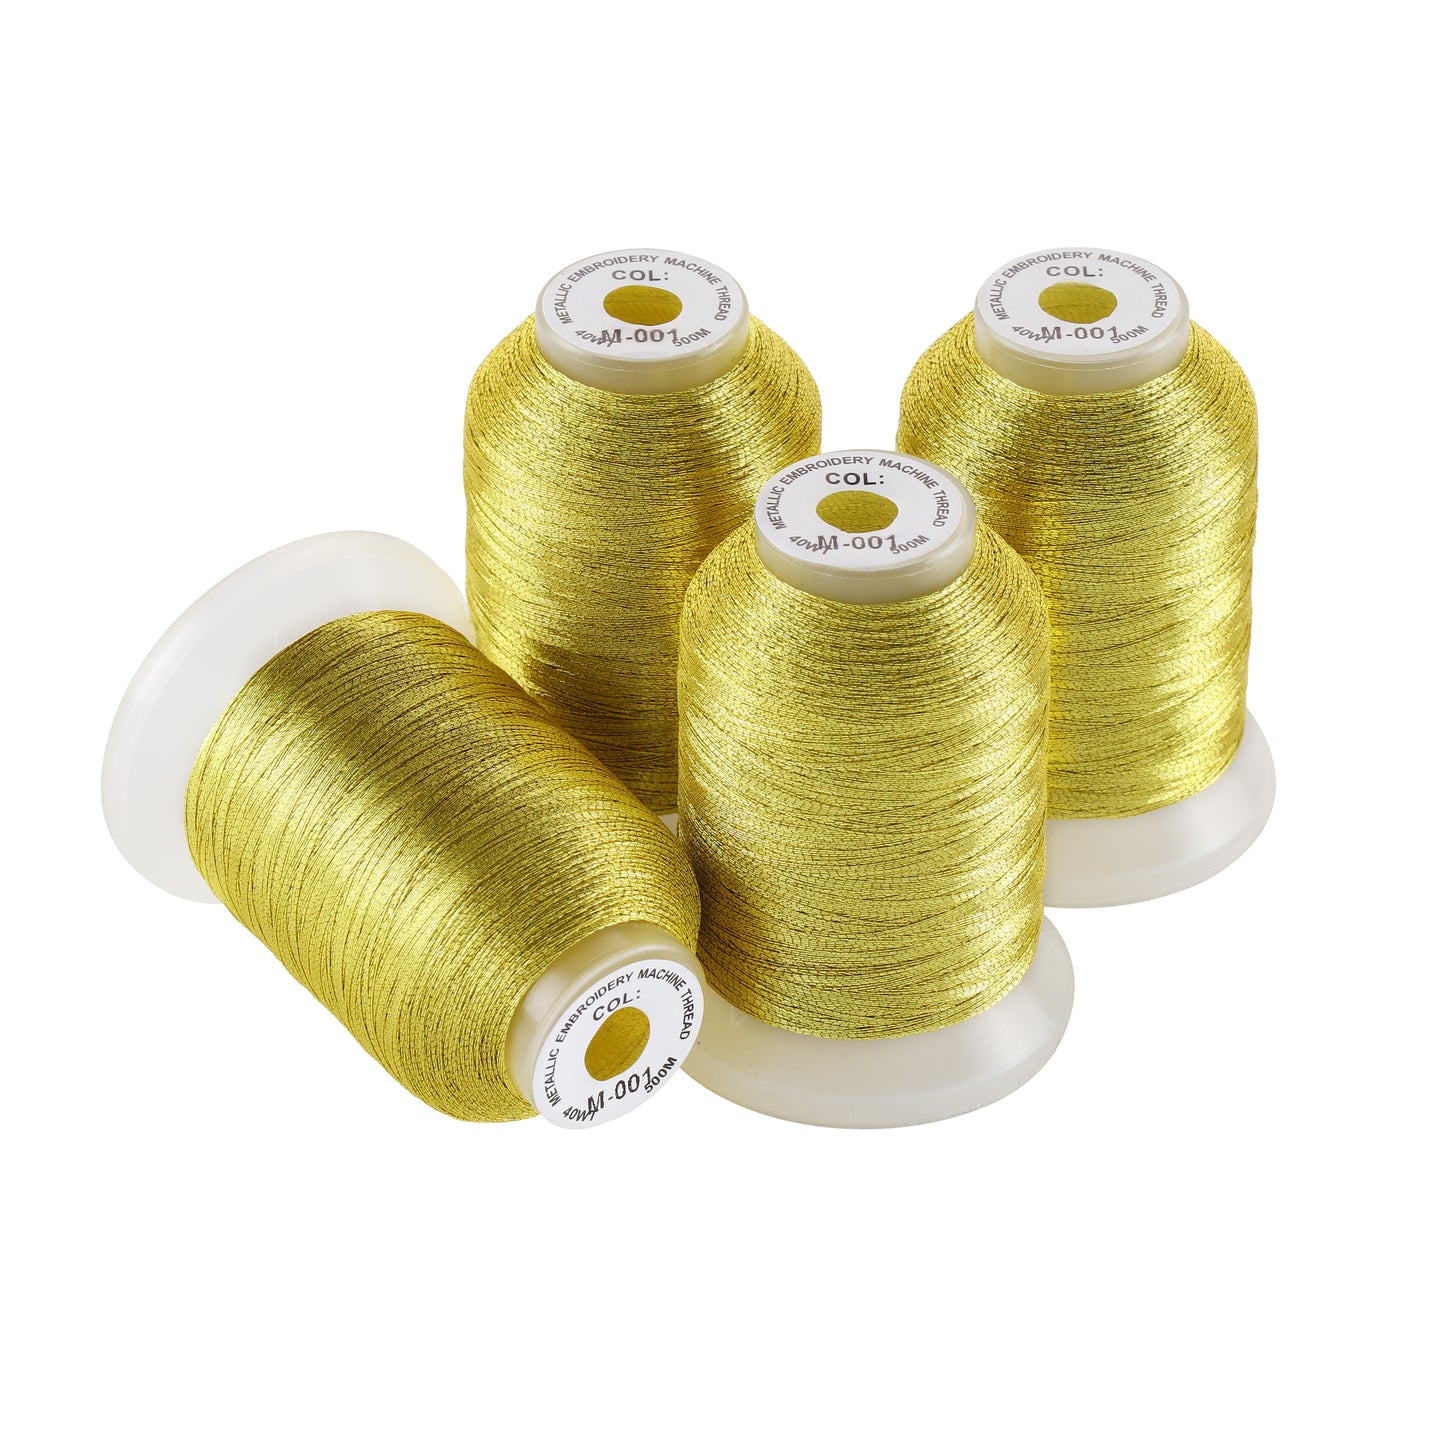 New brothread 4 Gold Metallic Embroidery Machine Thread Kit 500M (550Y)  Each Spool for Computerized Embroidery and Decorative Sewing